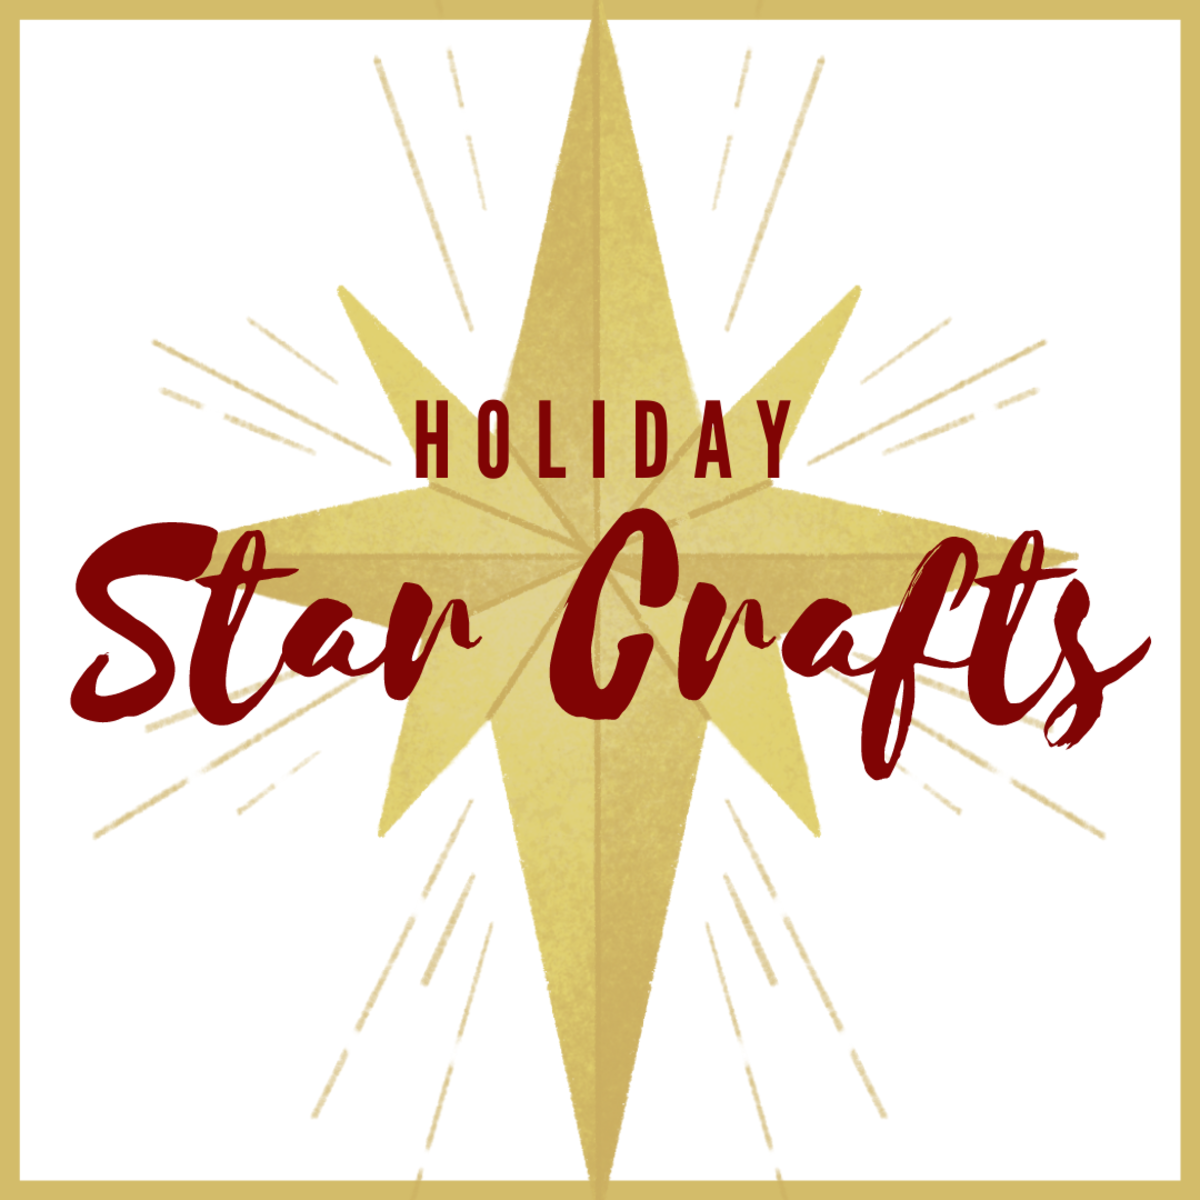 Find dozens of crafting ideas for making stars.